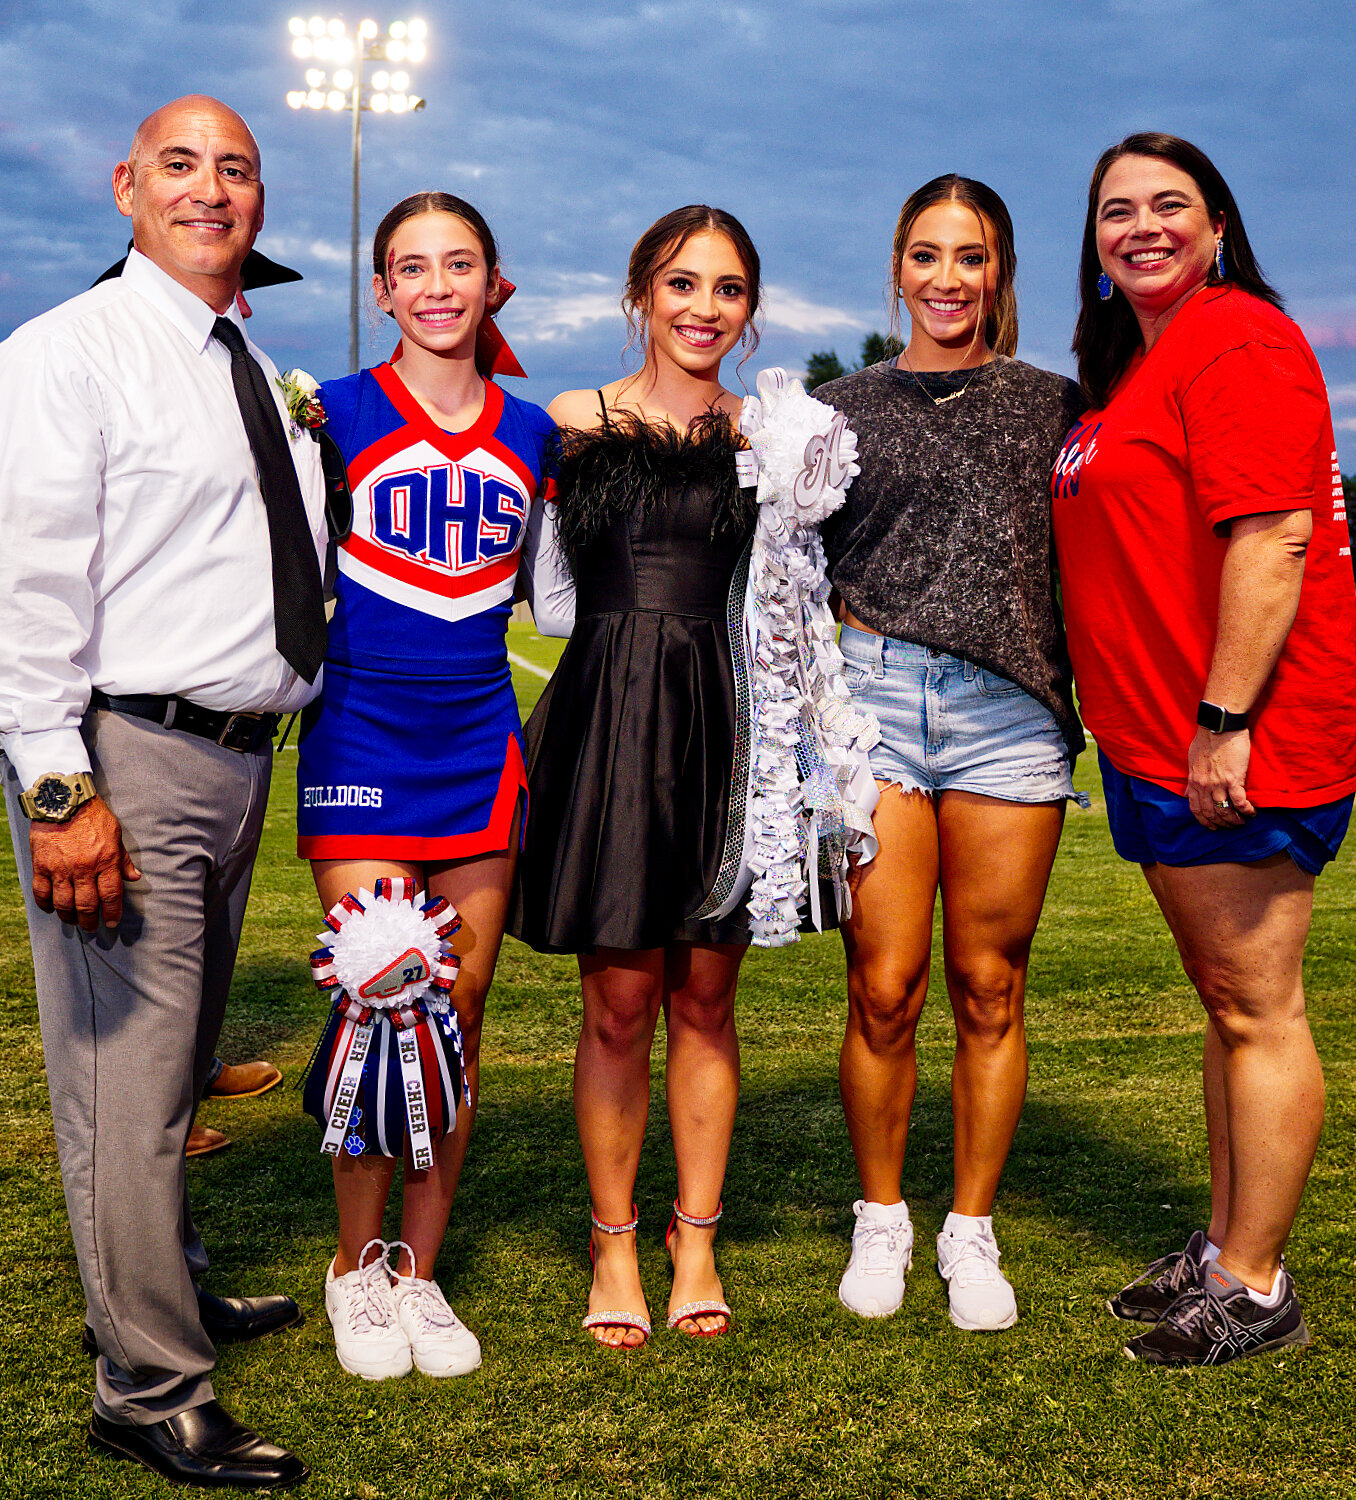 Two generations of Bulldogs - two current and three alumni – (left to right) Andy, Cooper, Addison, Brooklyn and Heather Marcee took part in homecoming festivities. [see more sights & buy Bulldogs prints]